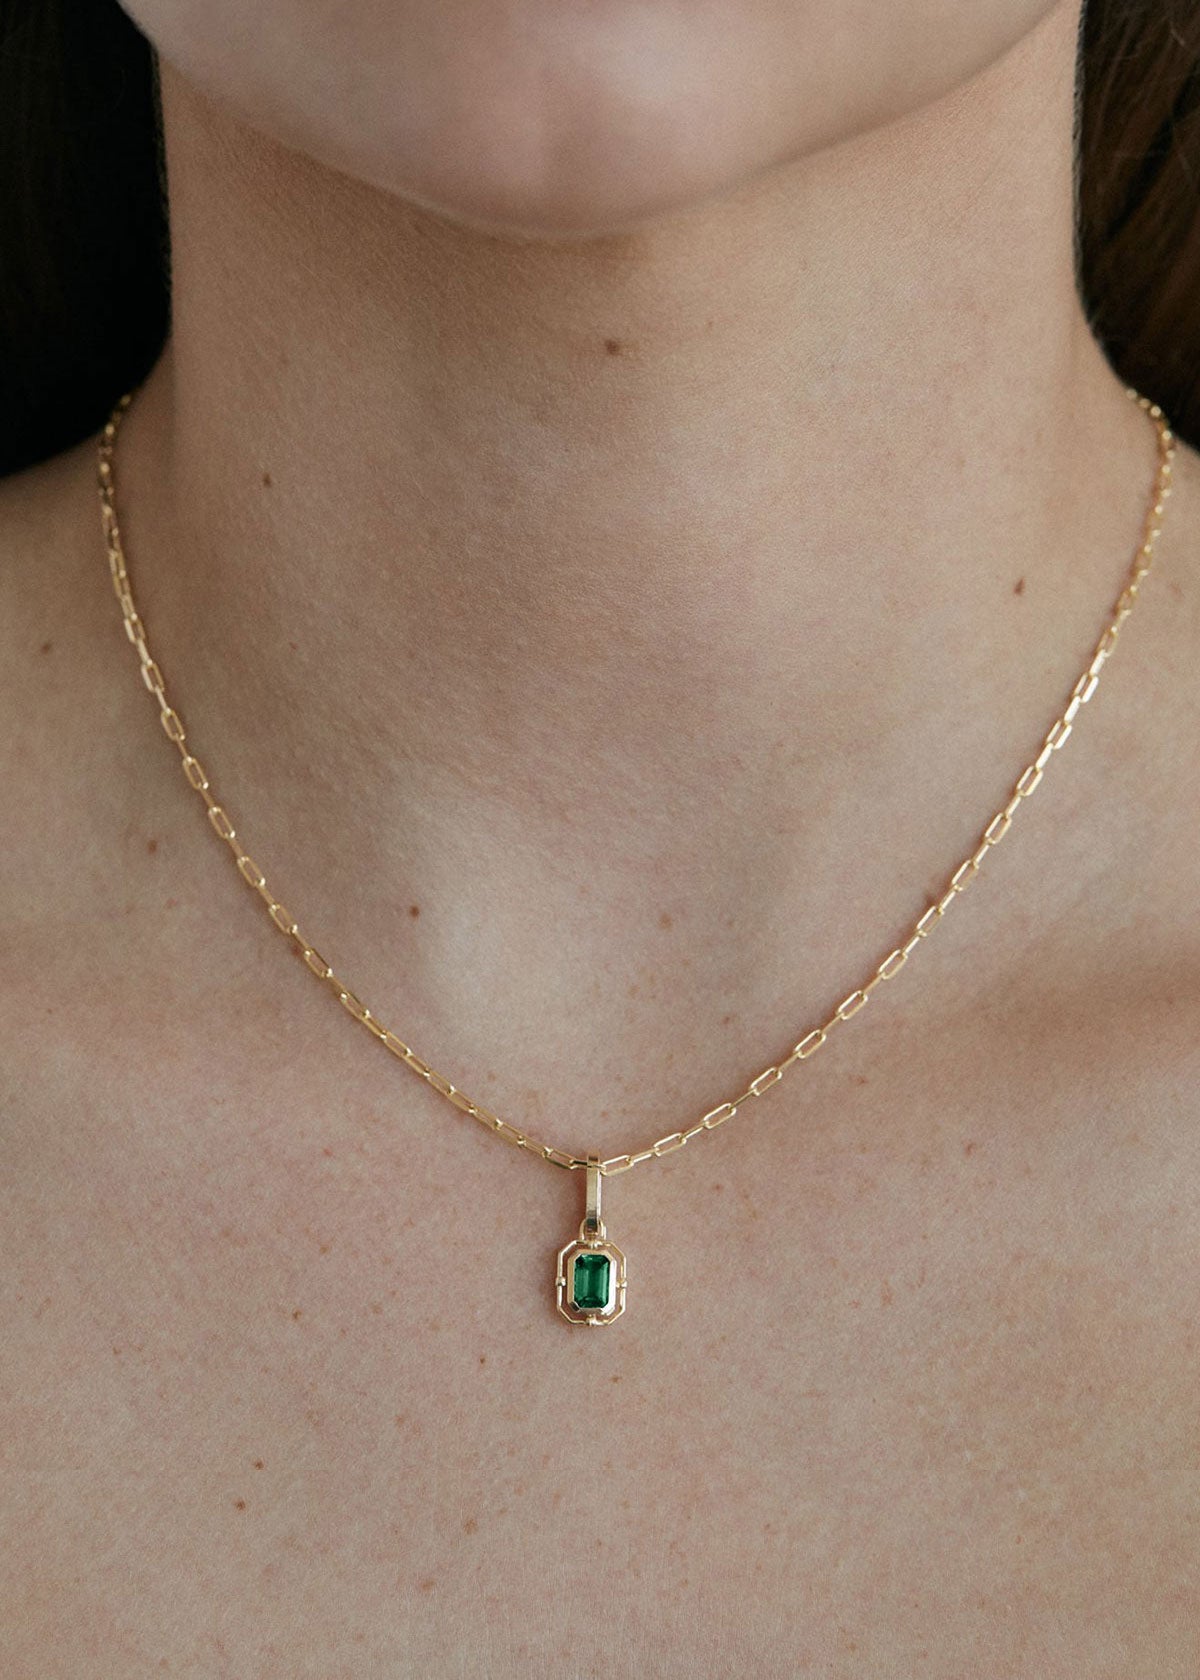 alt="Lyra Baguette Pendant I - Emerald with pico link chain"